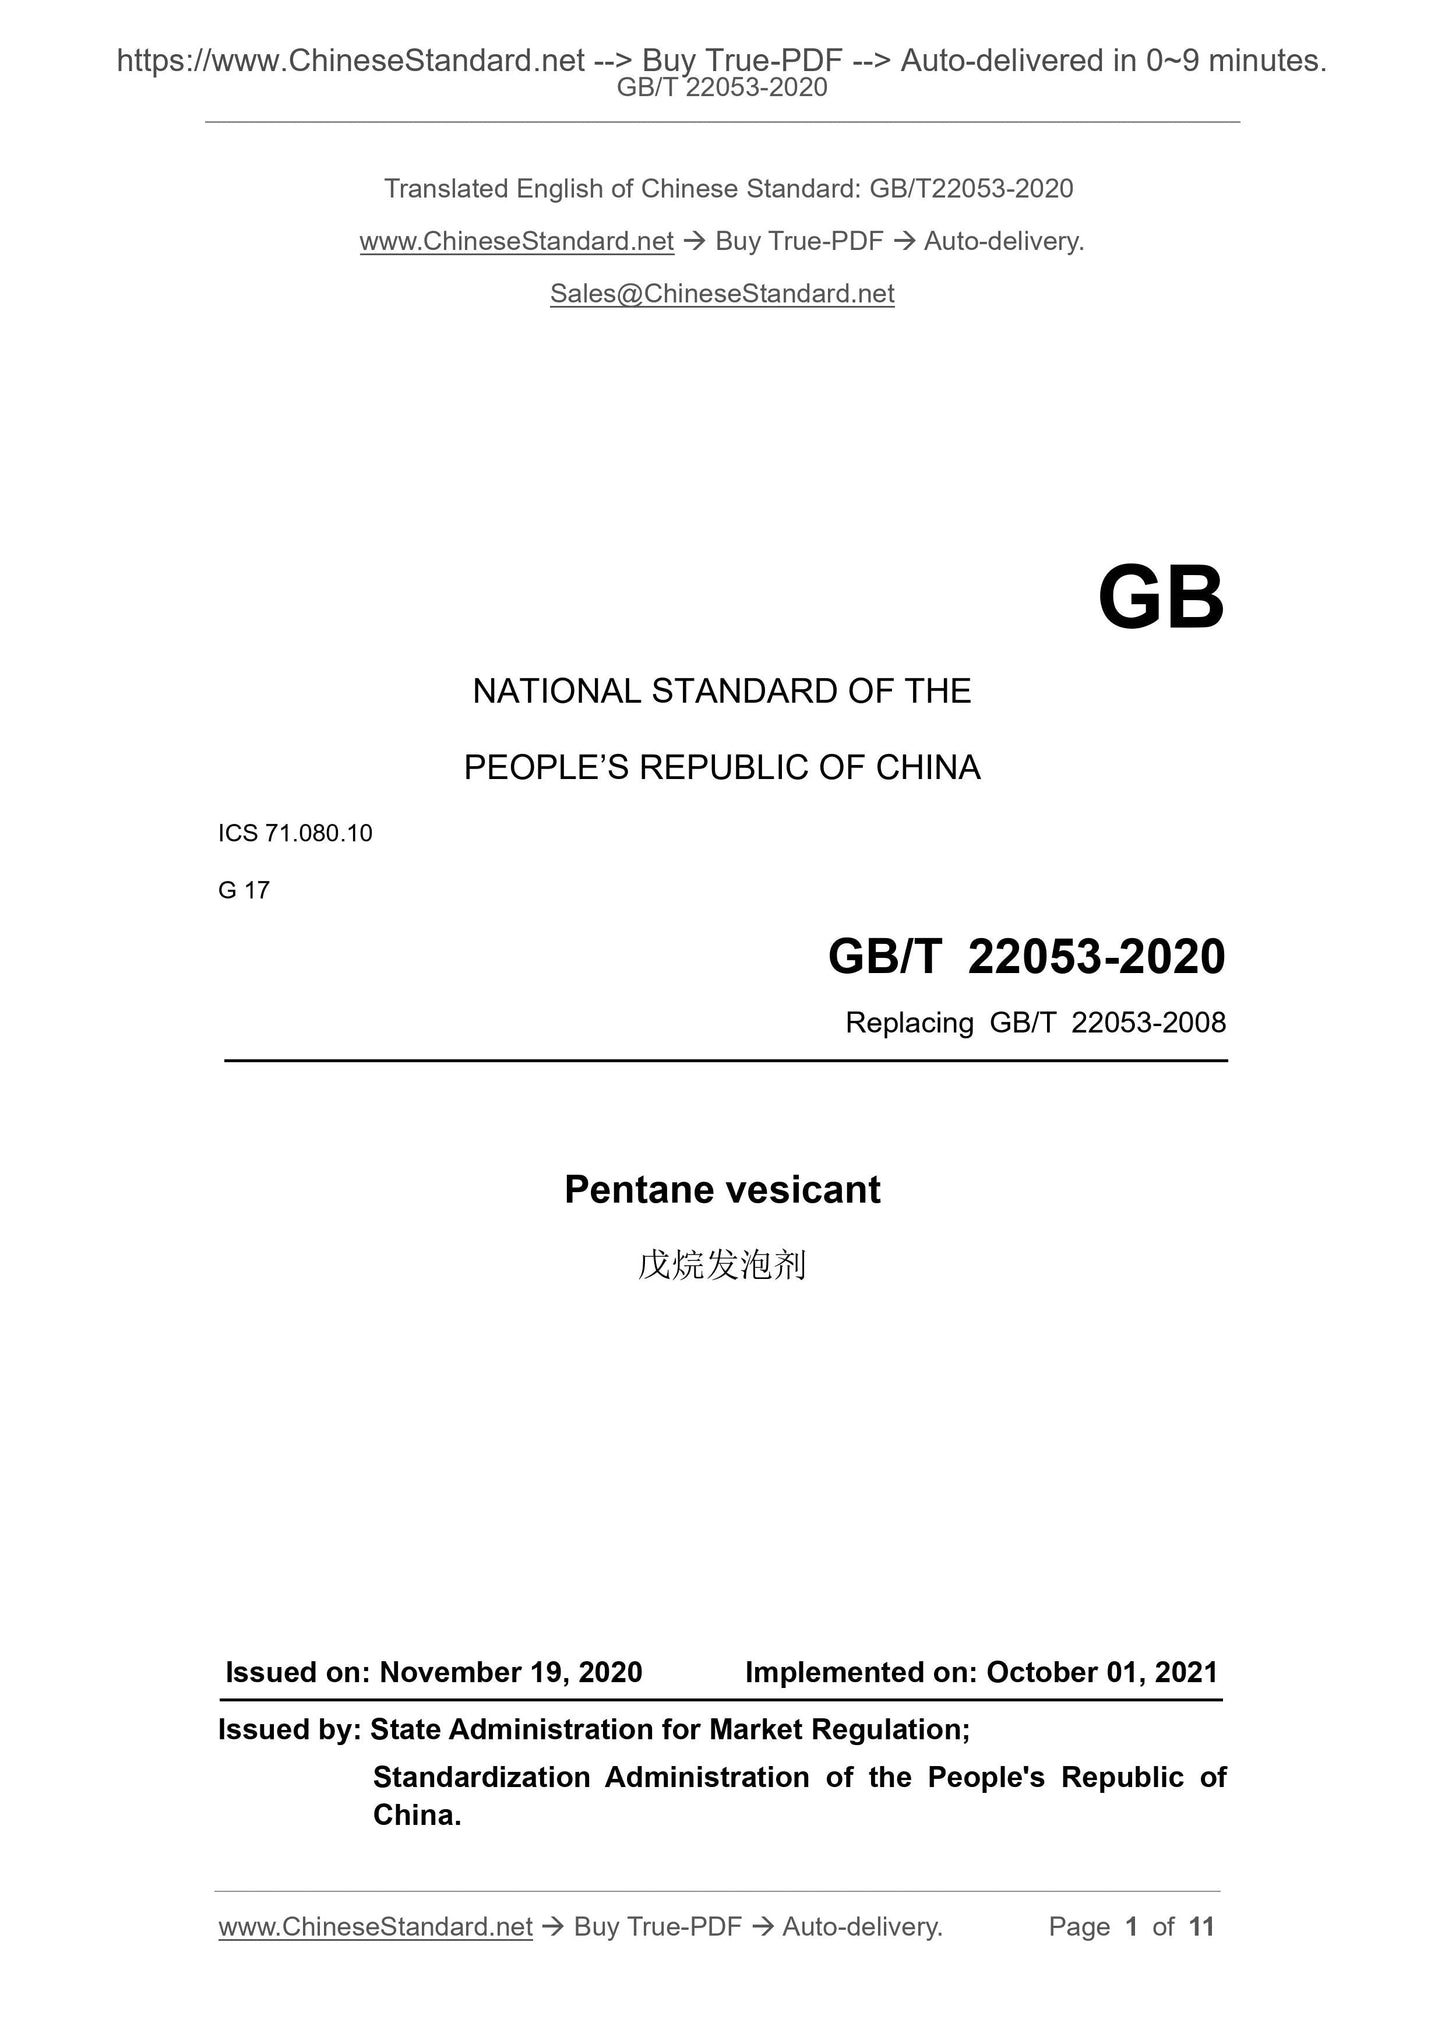 GB/T 22053-2020 Page 1